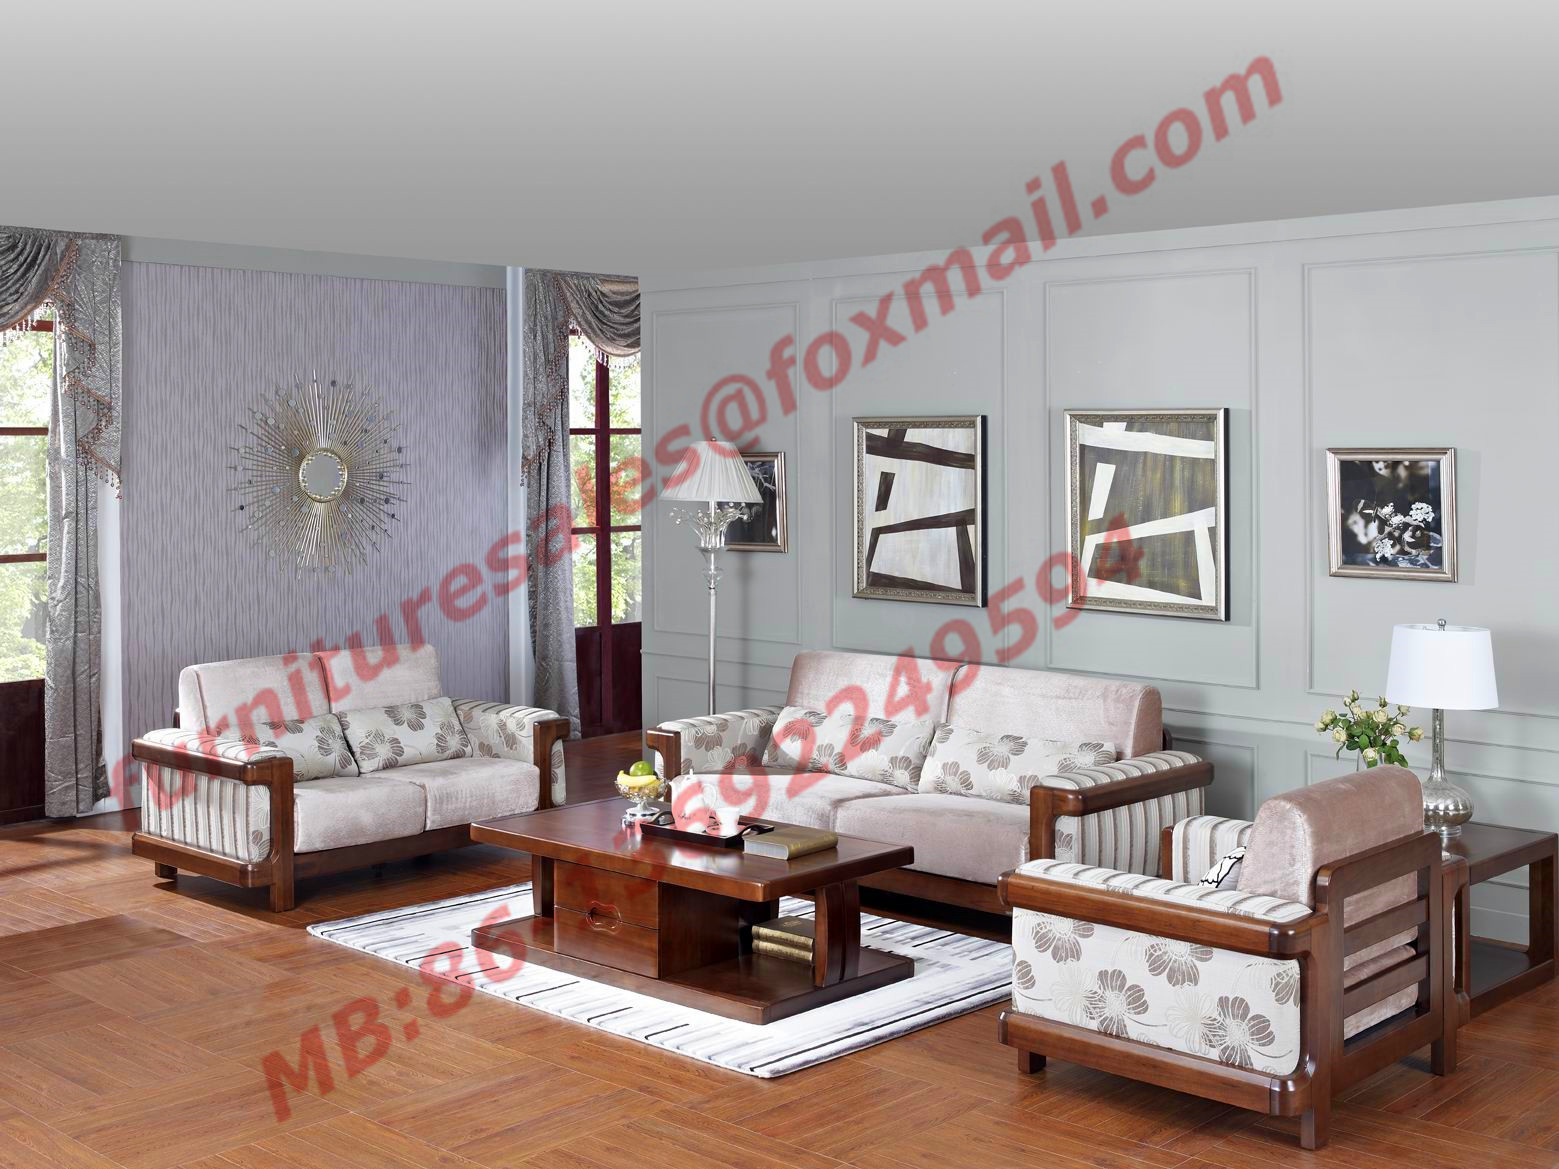 Buy cheap High Quality 1+2+3 Wooden Sofa Set from Shenzhen Right Home Furniture in Shenzhen China product